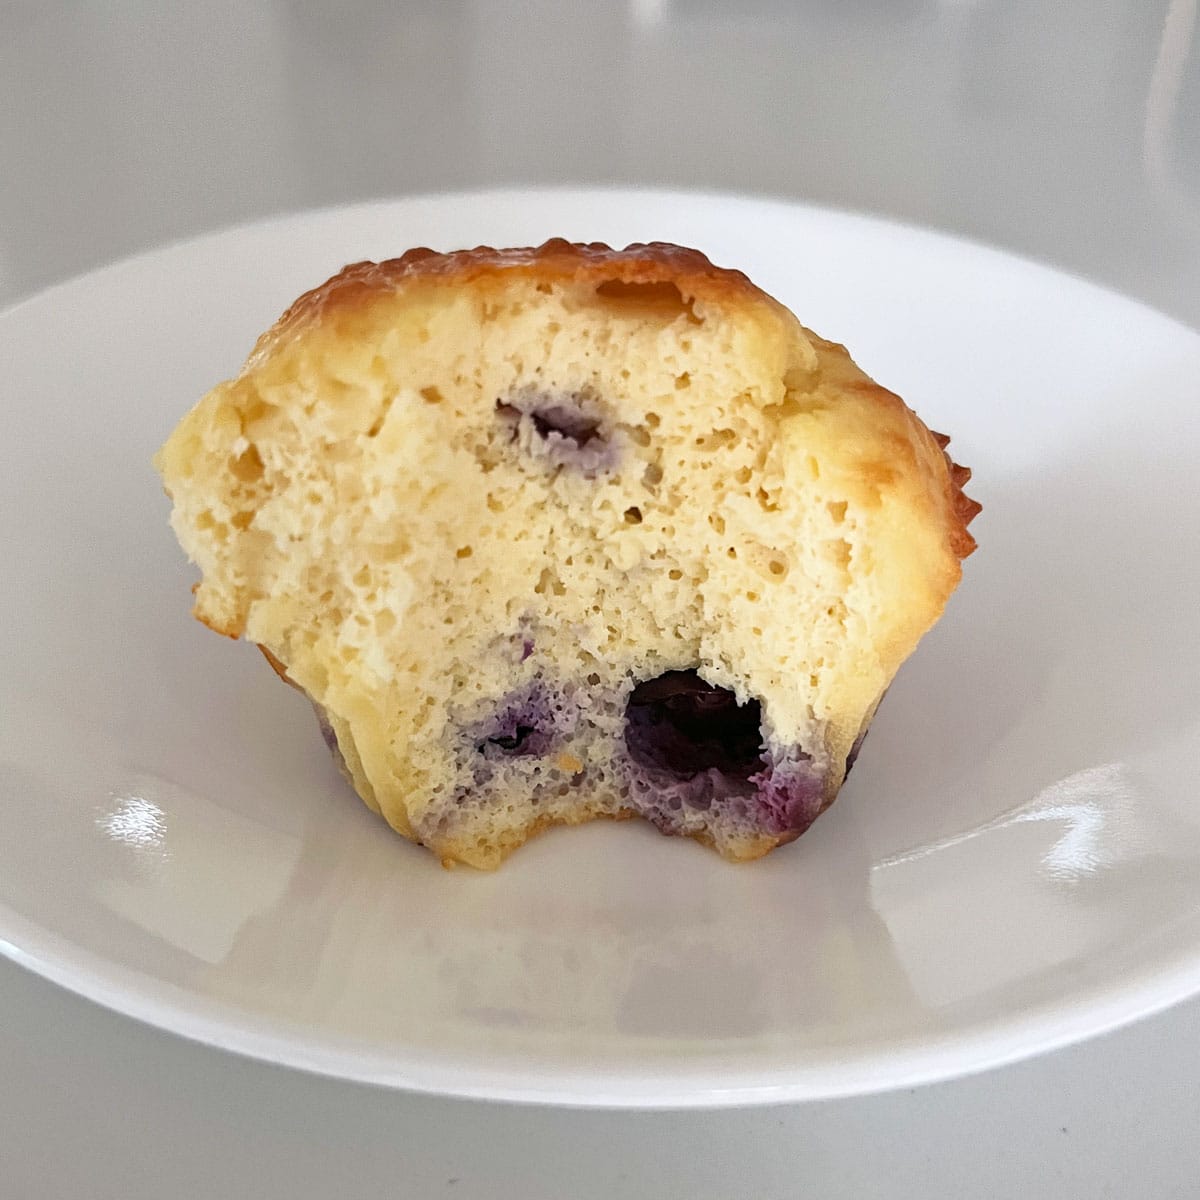 A blueberry protein muffin on a plate.